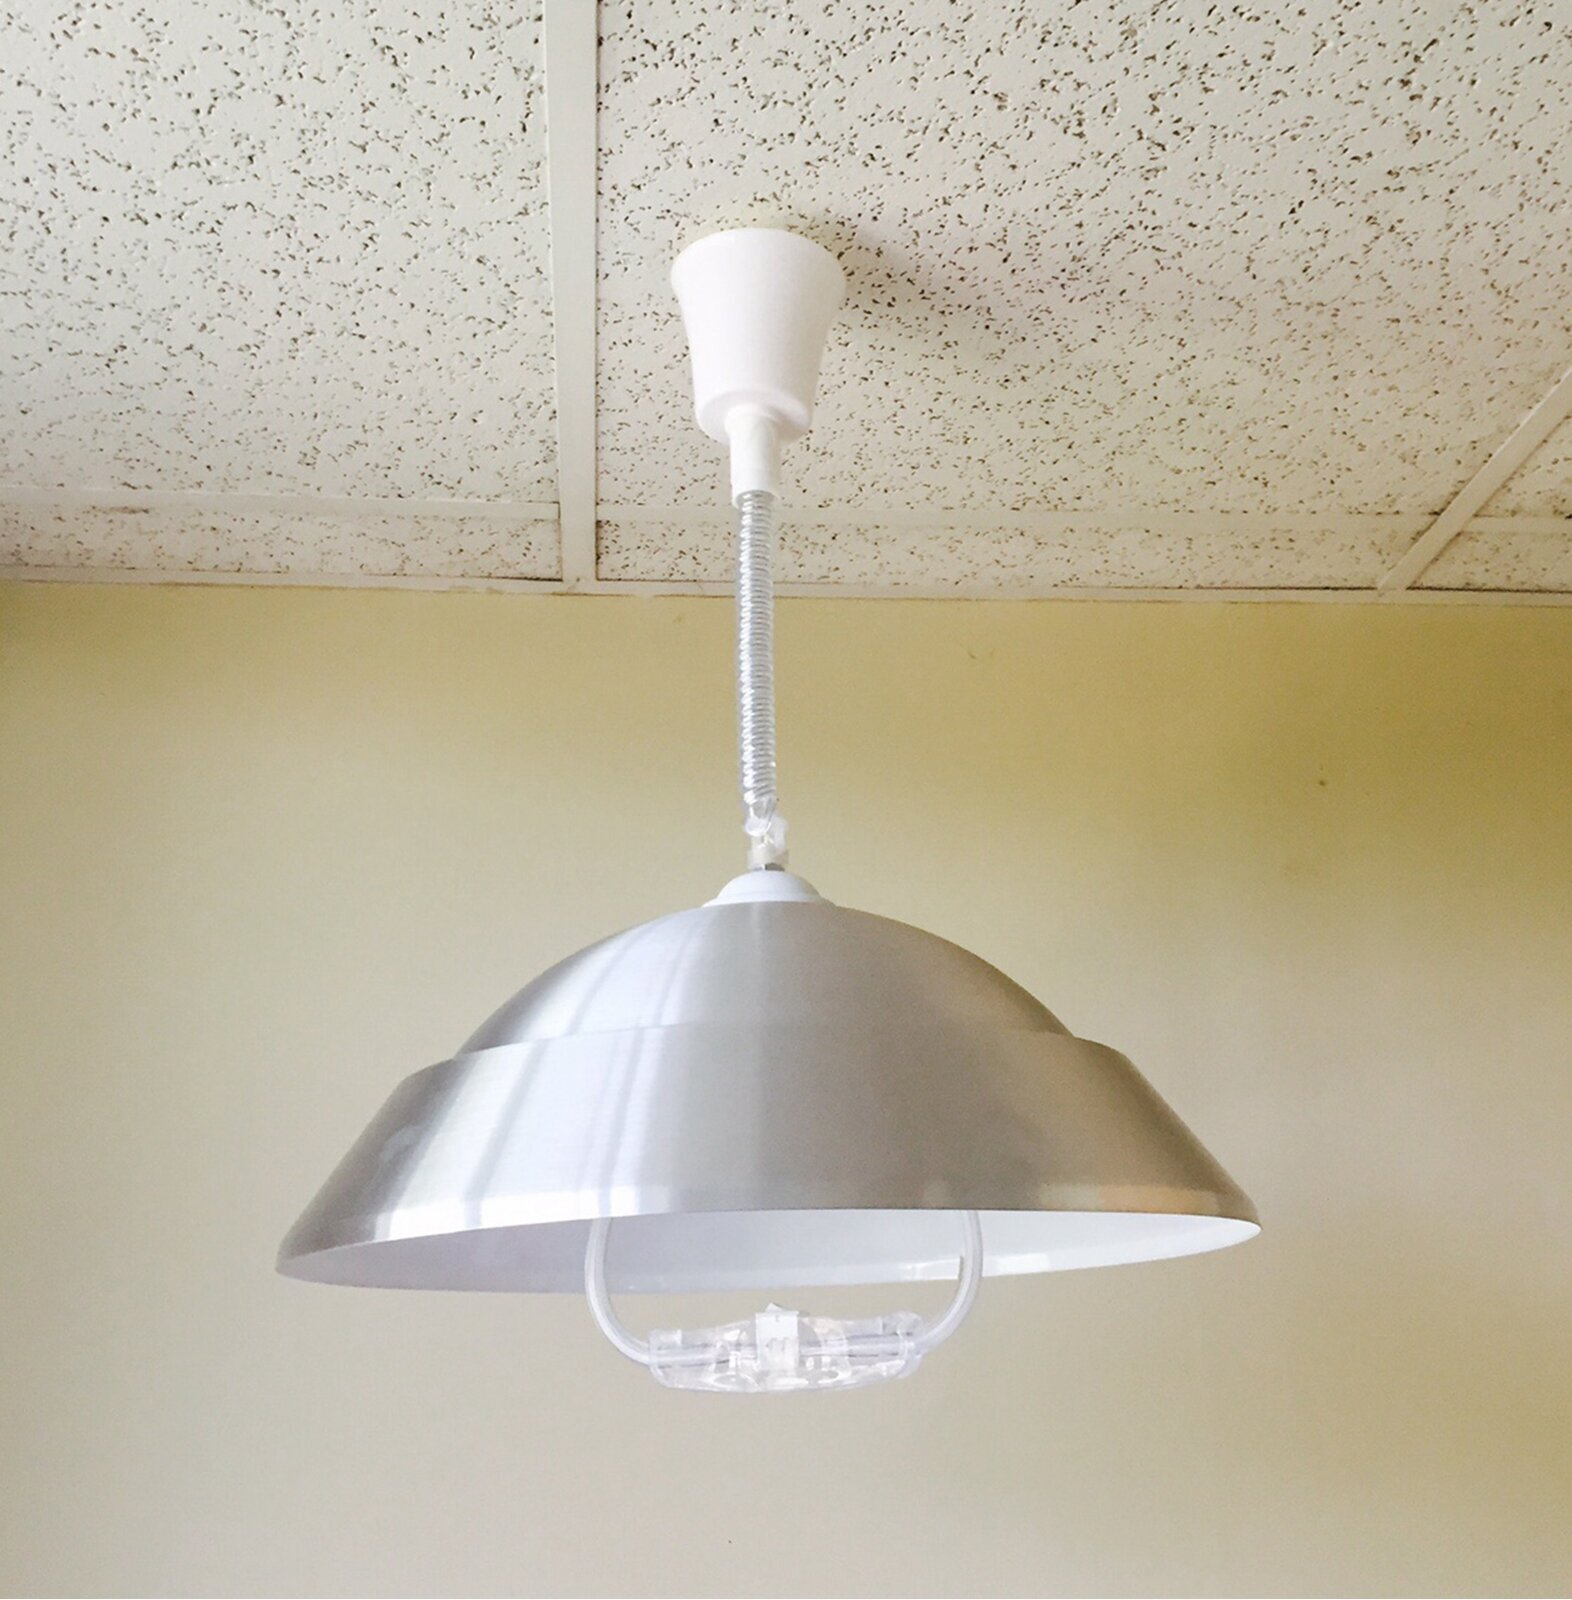 Neutral, domed retractable ceiling light with adjustable height